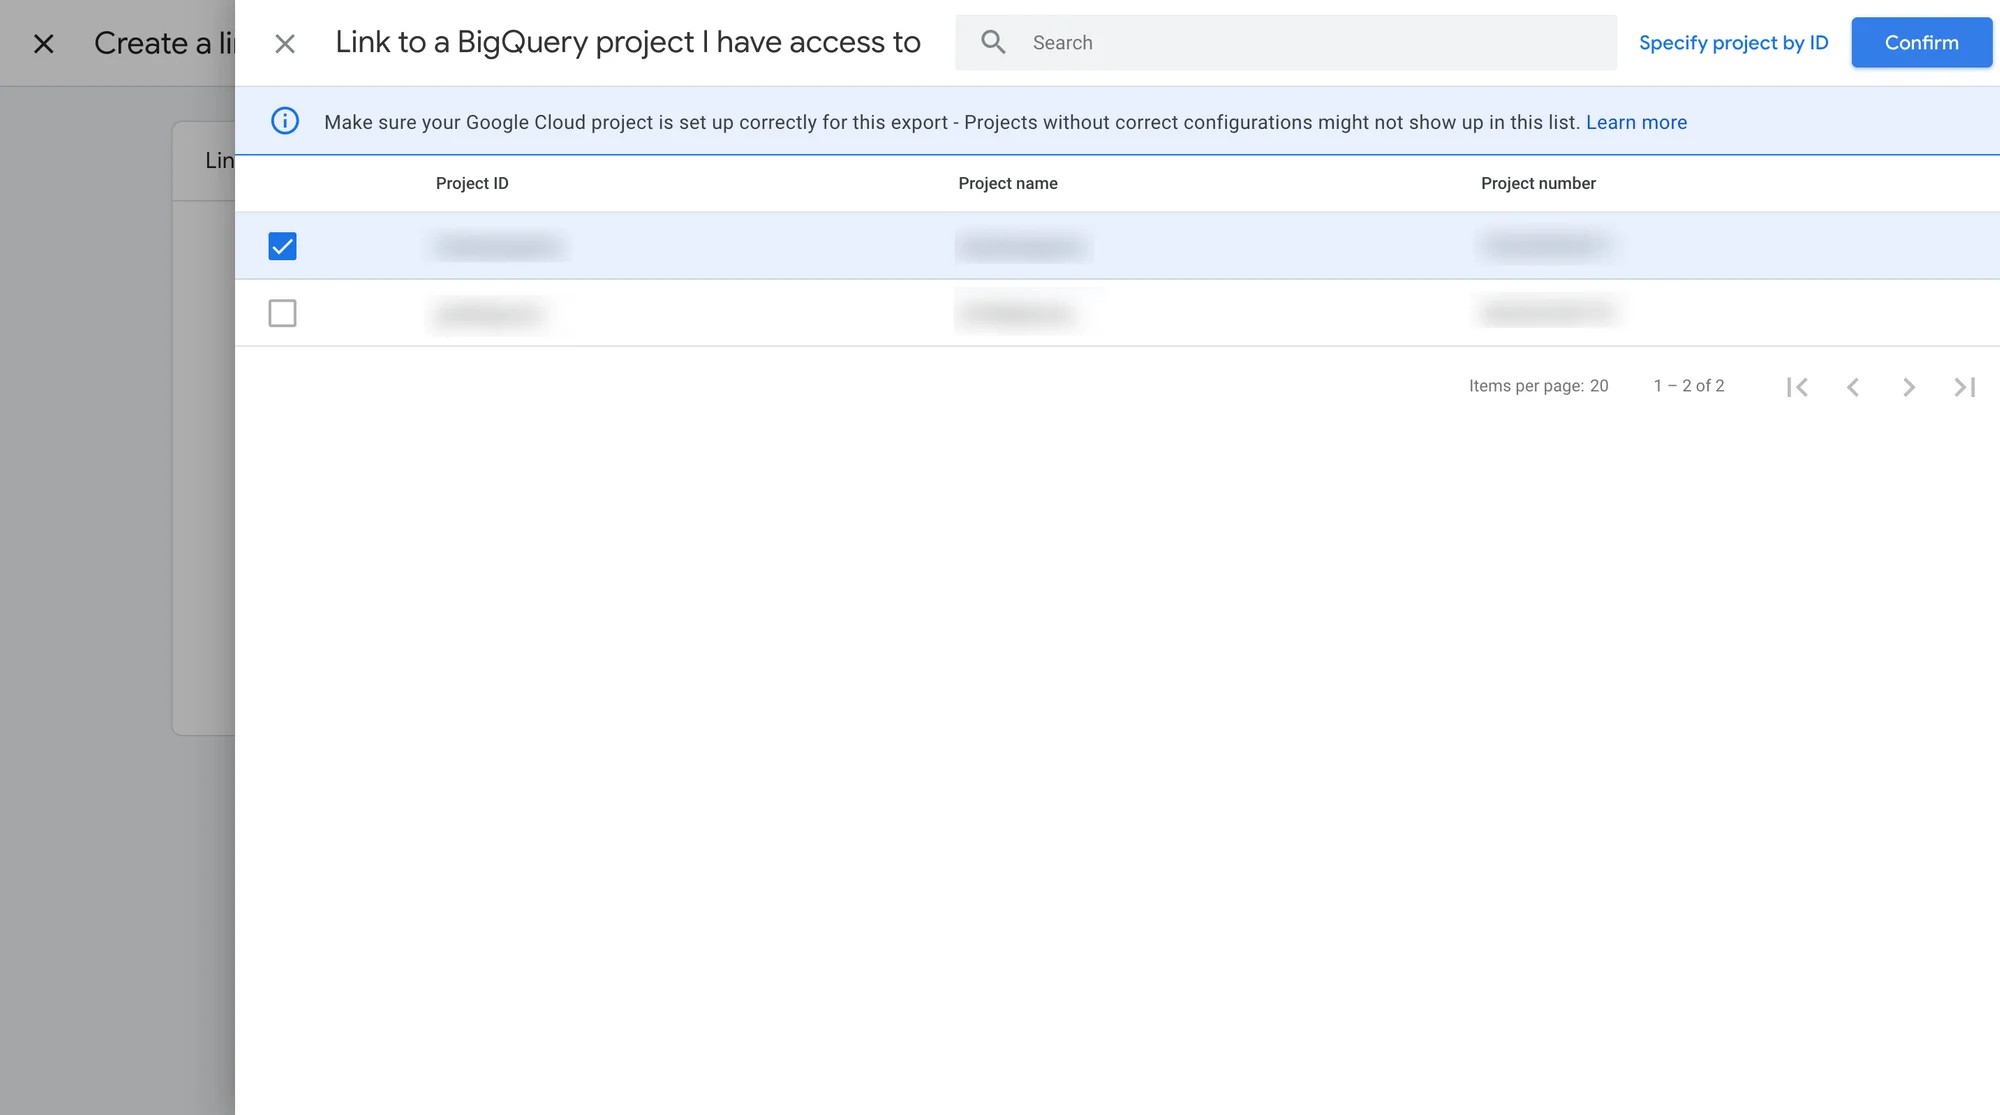 Choose the BigQuery Project